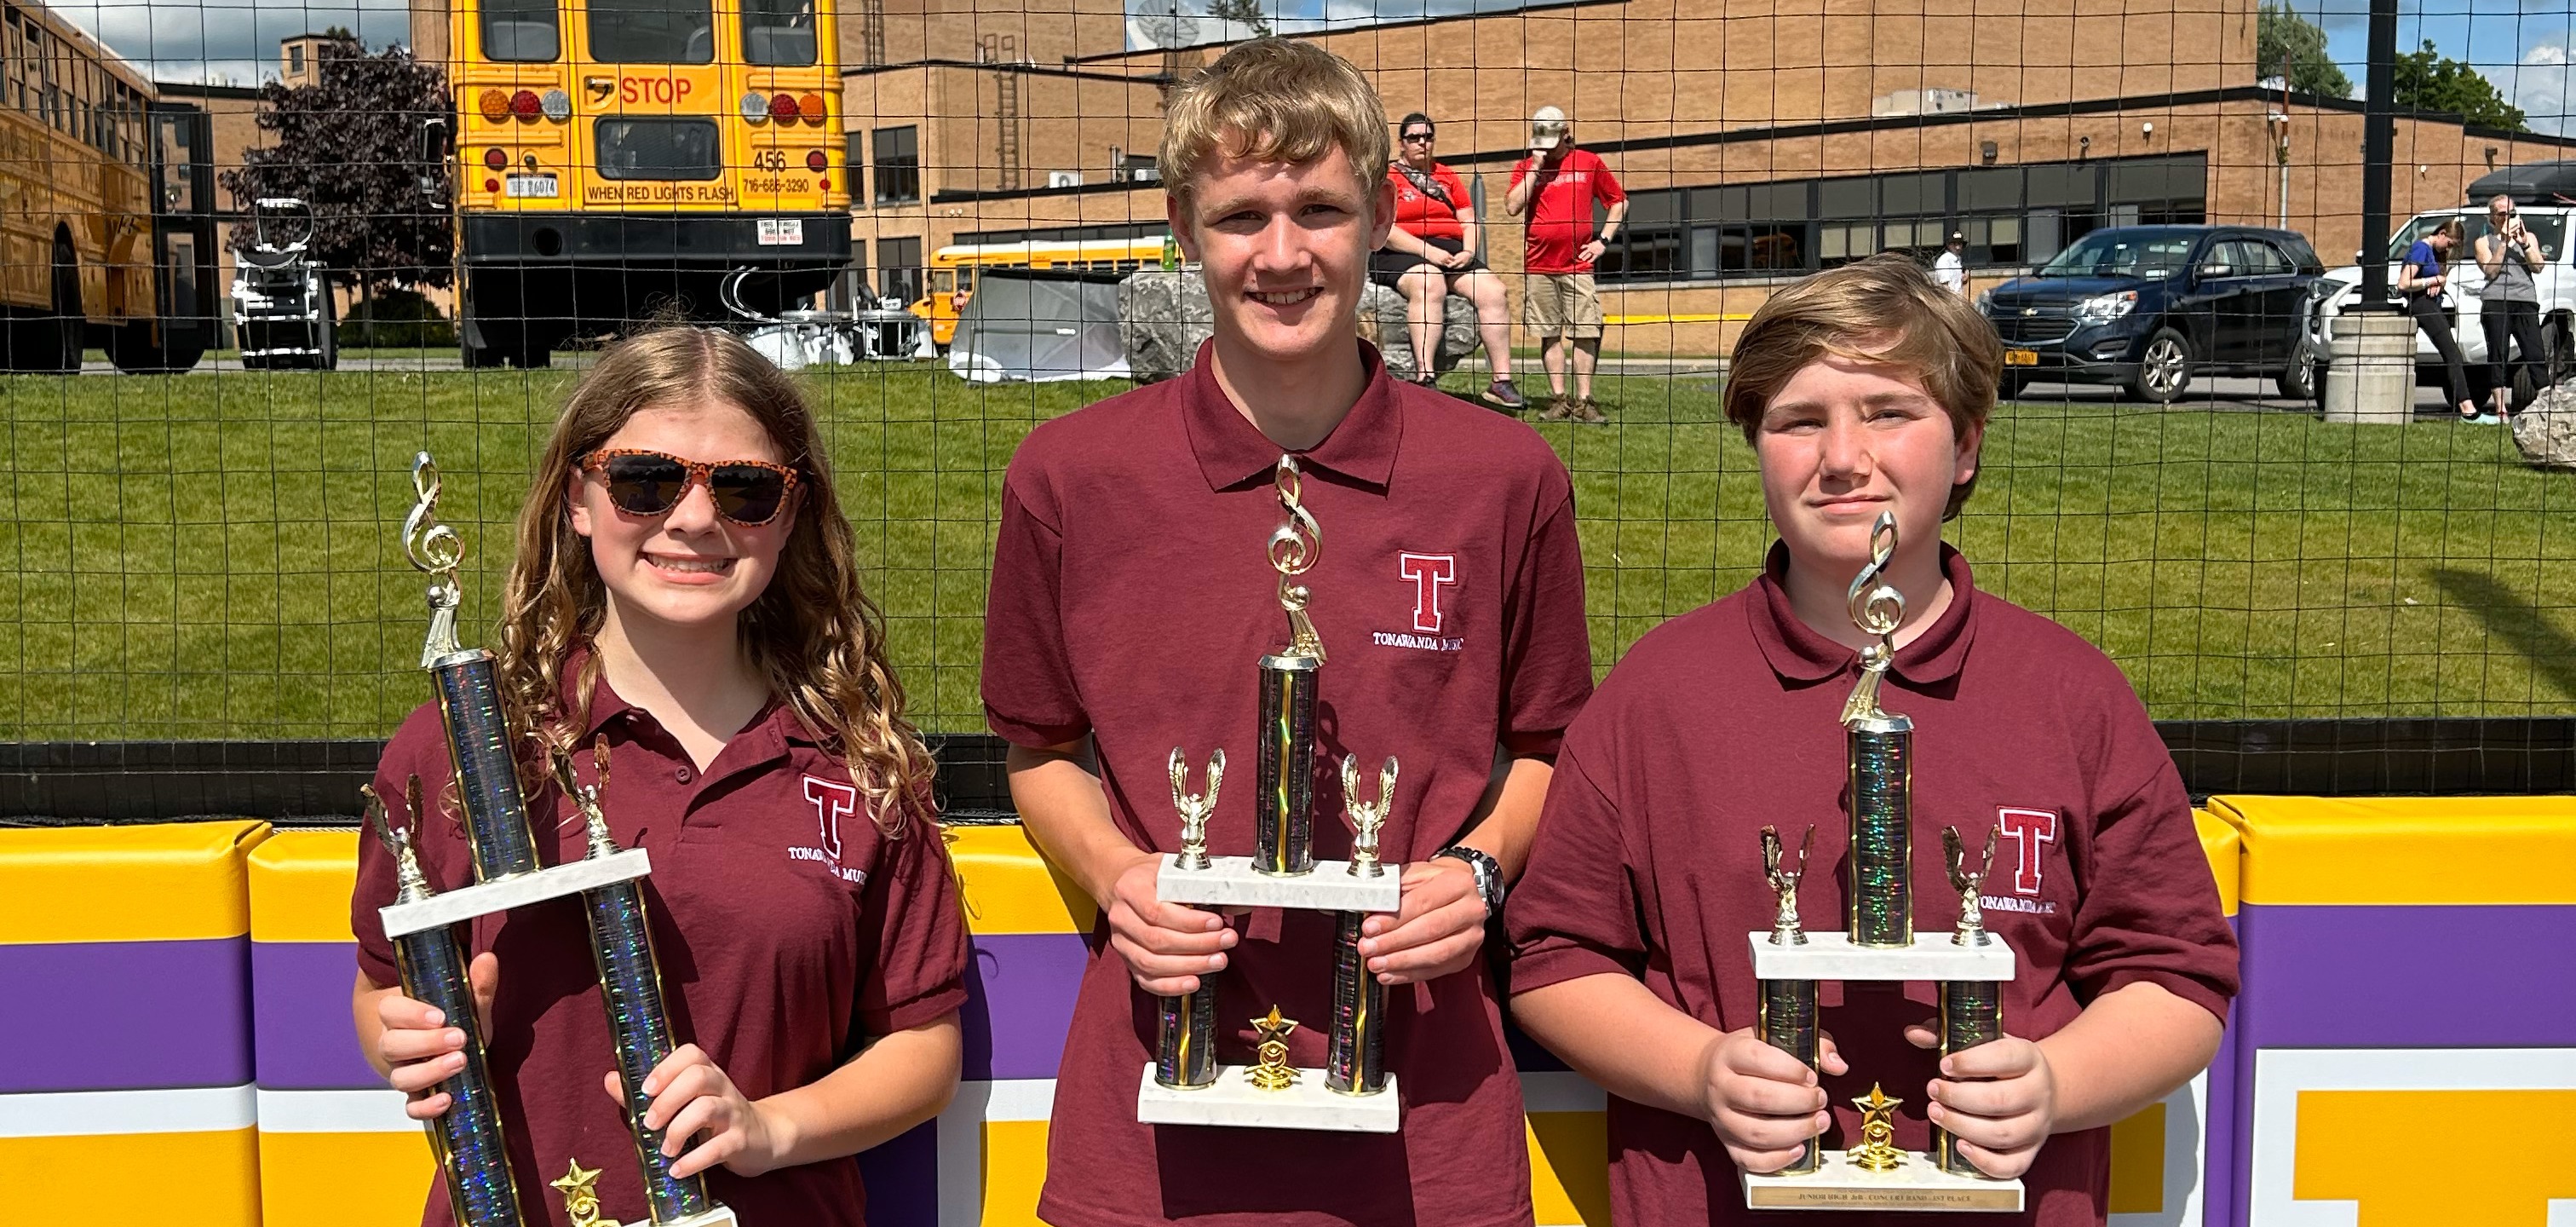 students pose with trophies after band competition